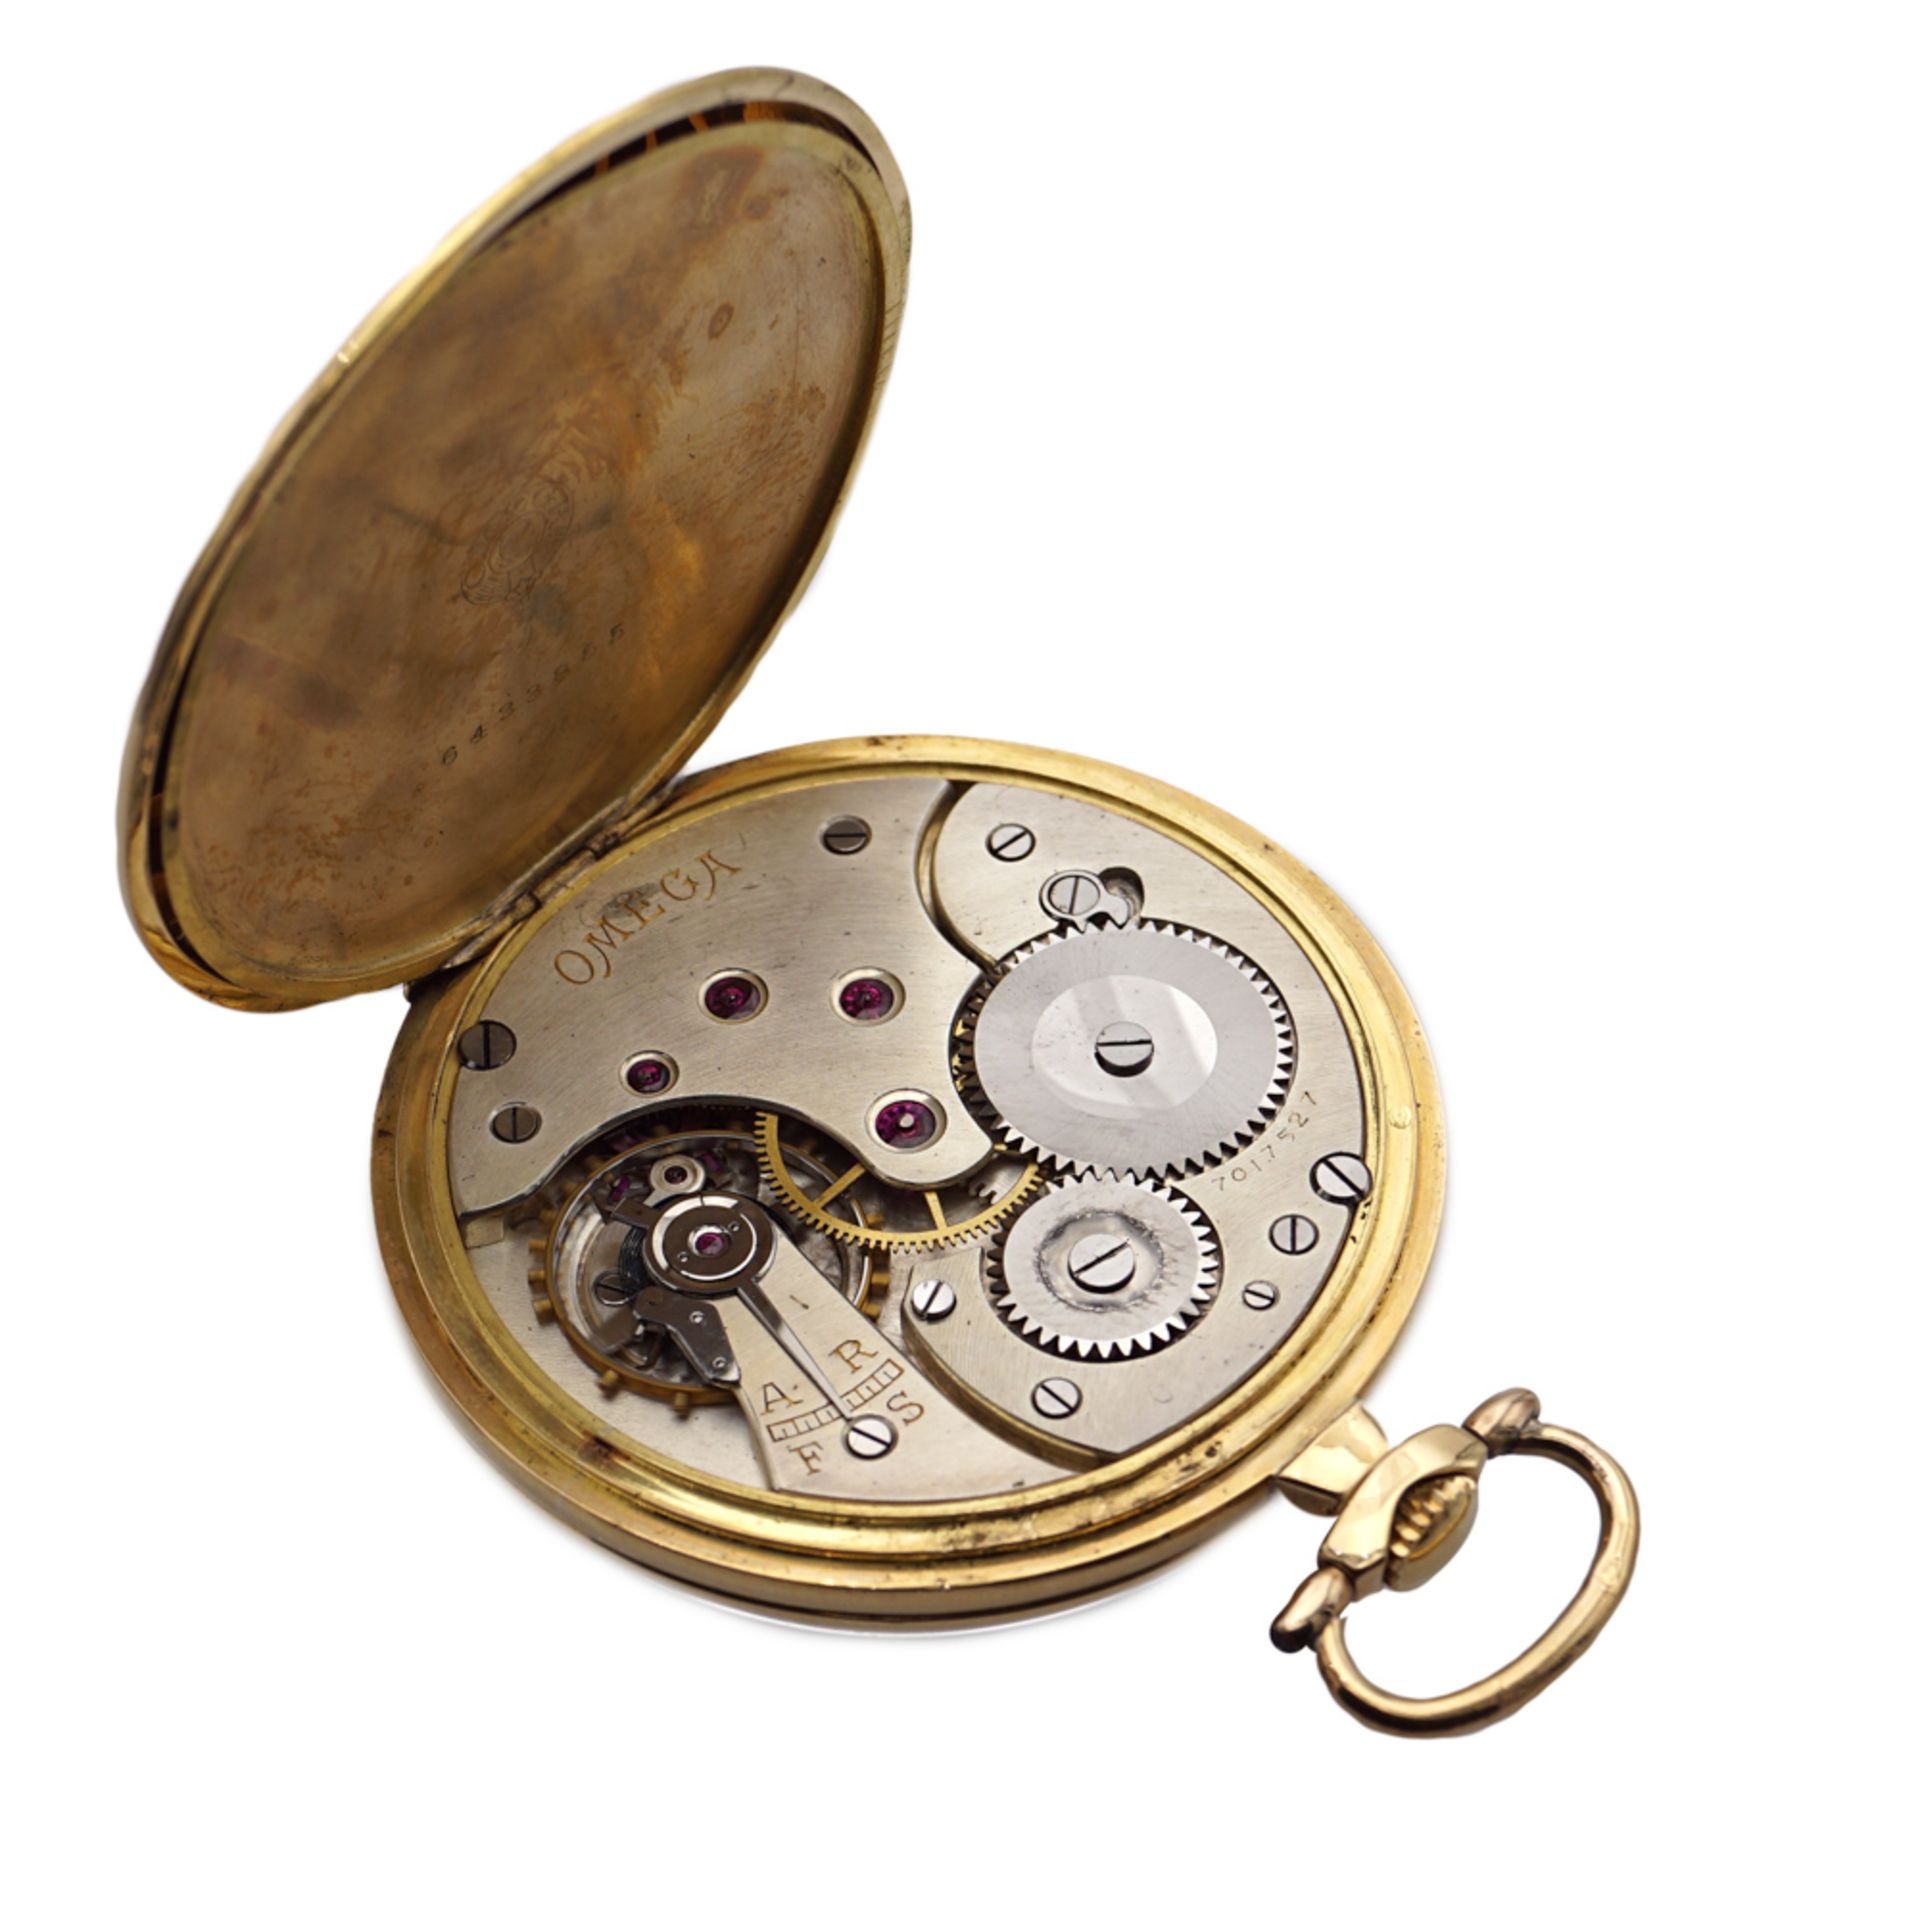 Omega, 18kt yellow gold pocket watch - Image 2 of 3